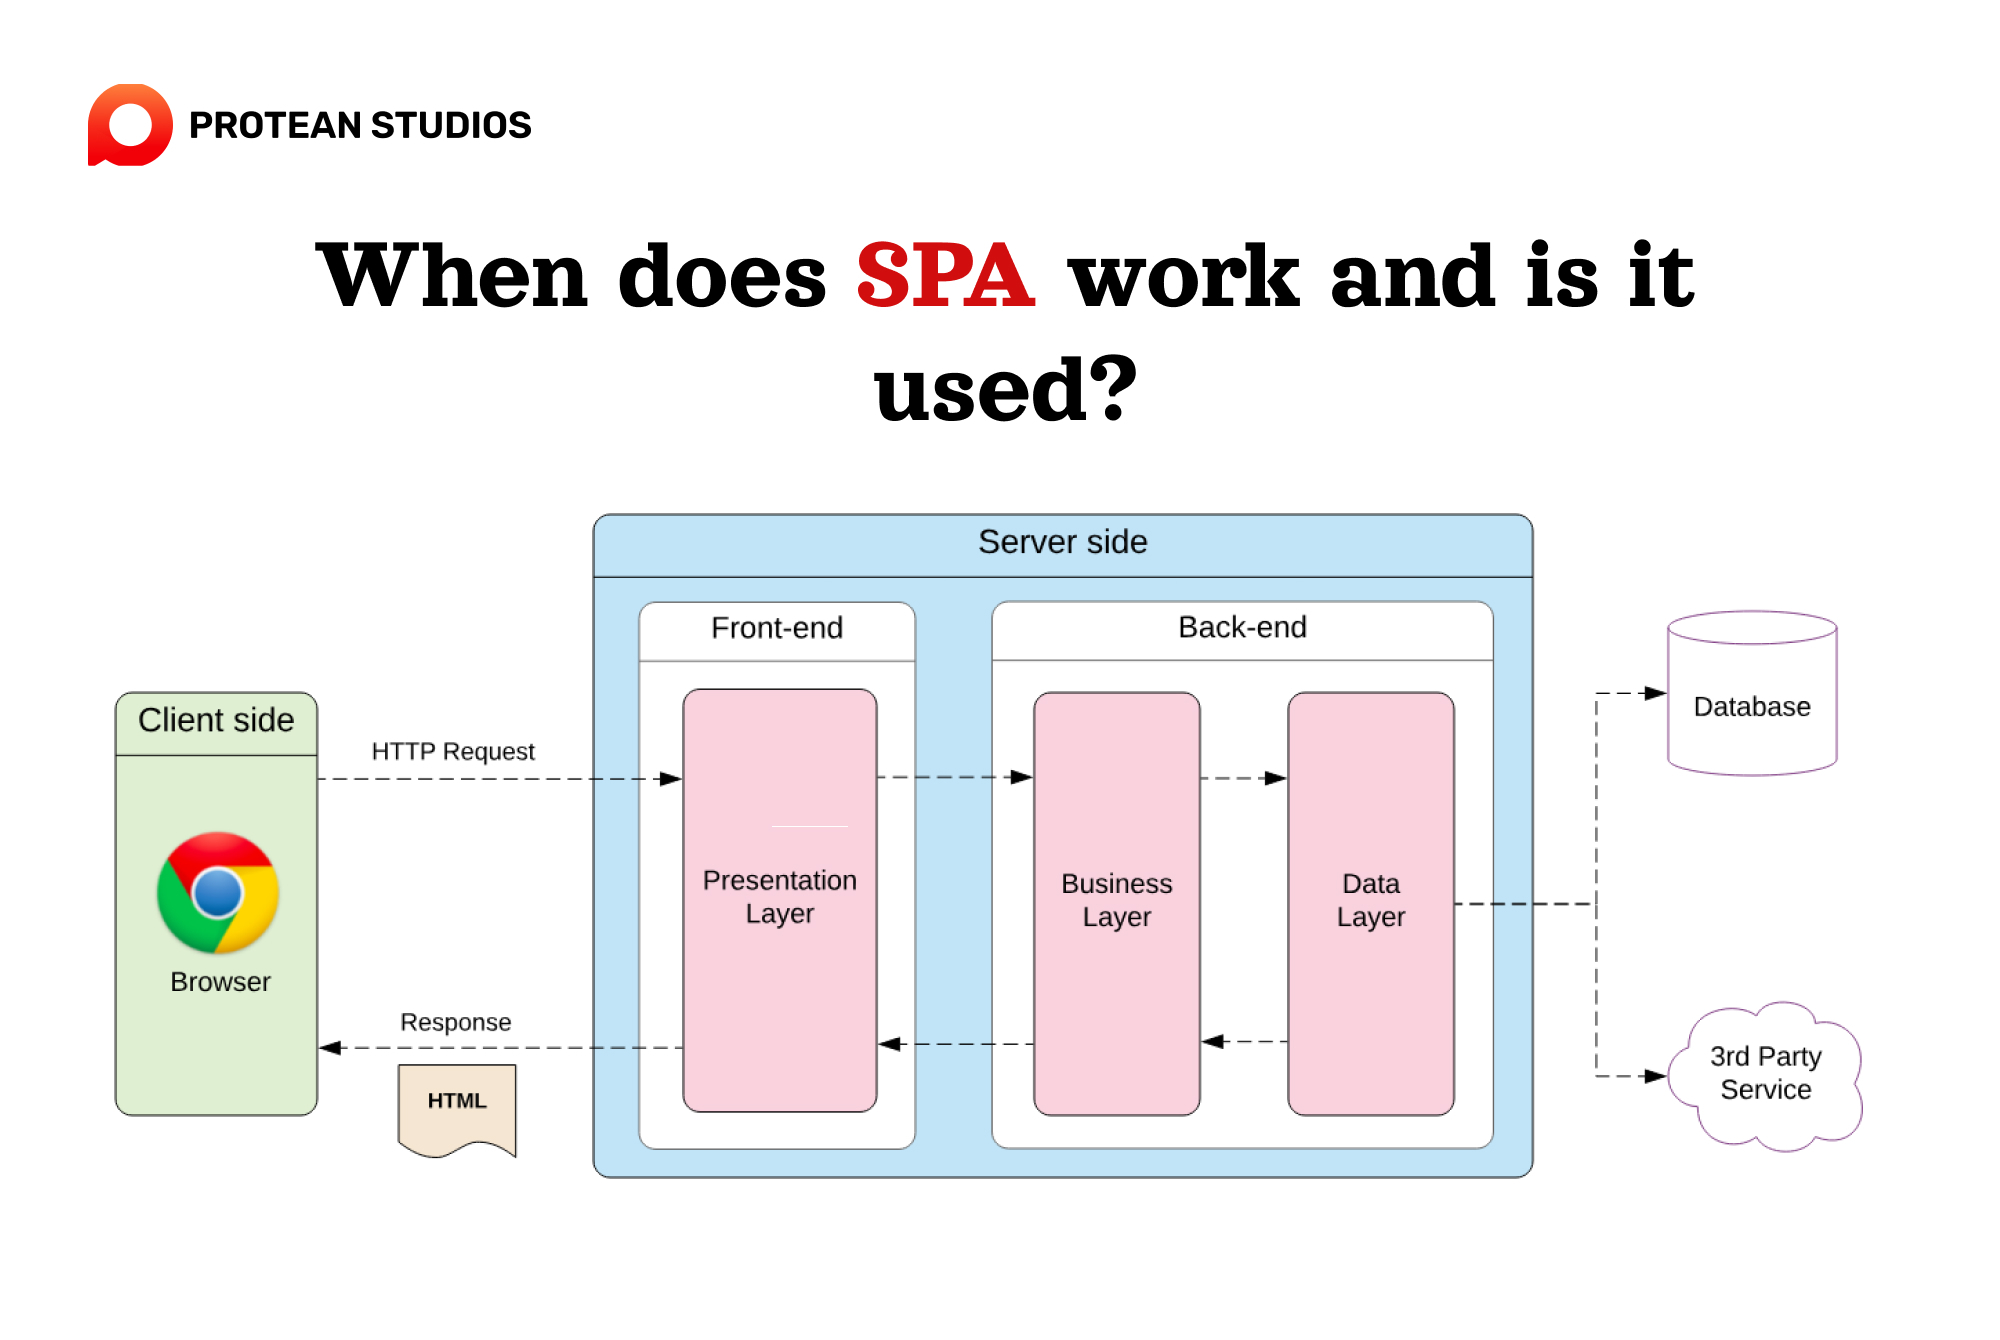 The mechanism of operation and use of SPA